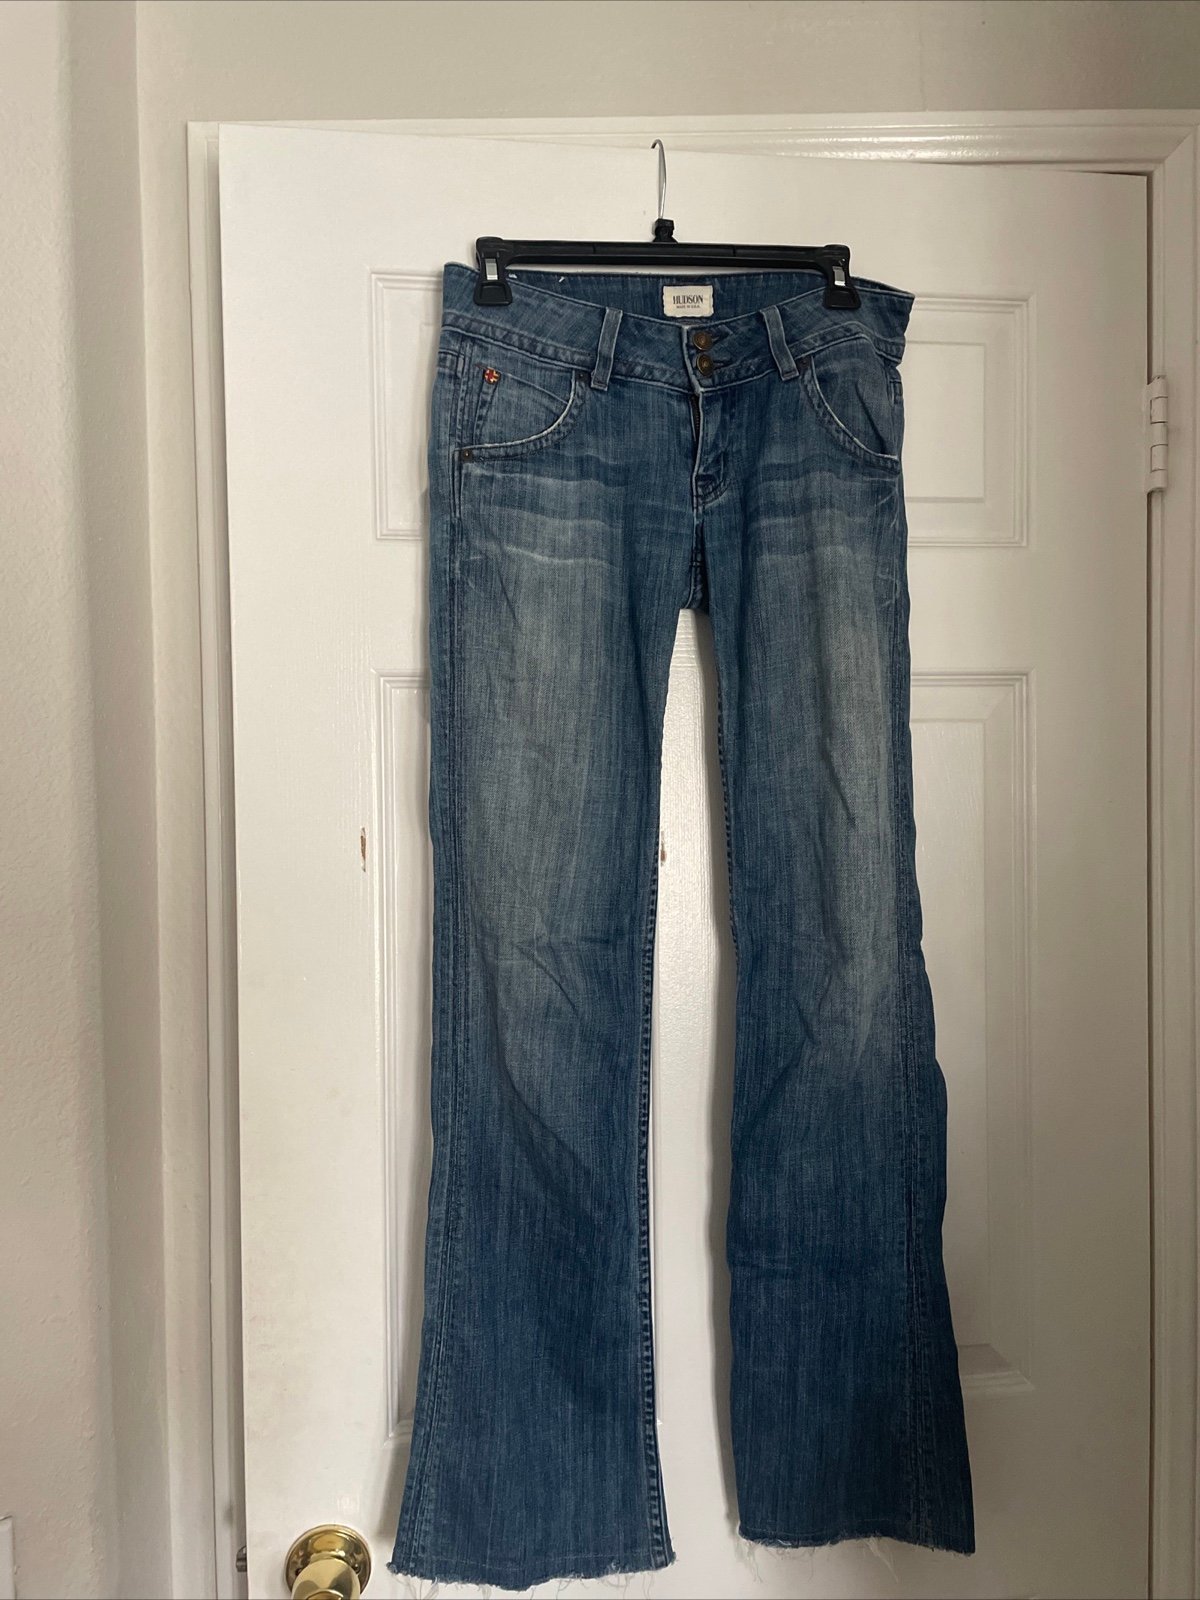 floor price Hudson jeans size 25 bootcut low rise flare